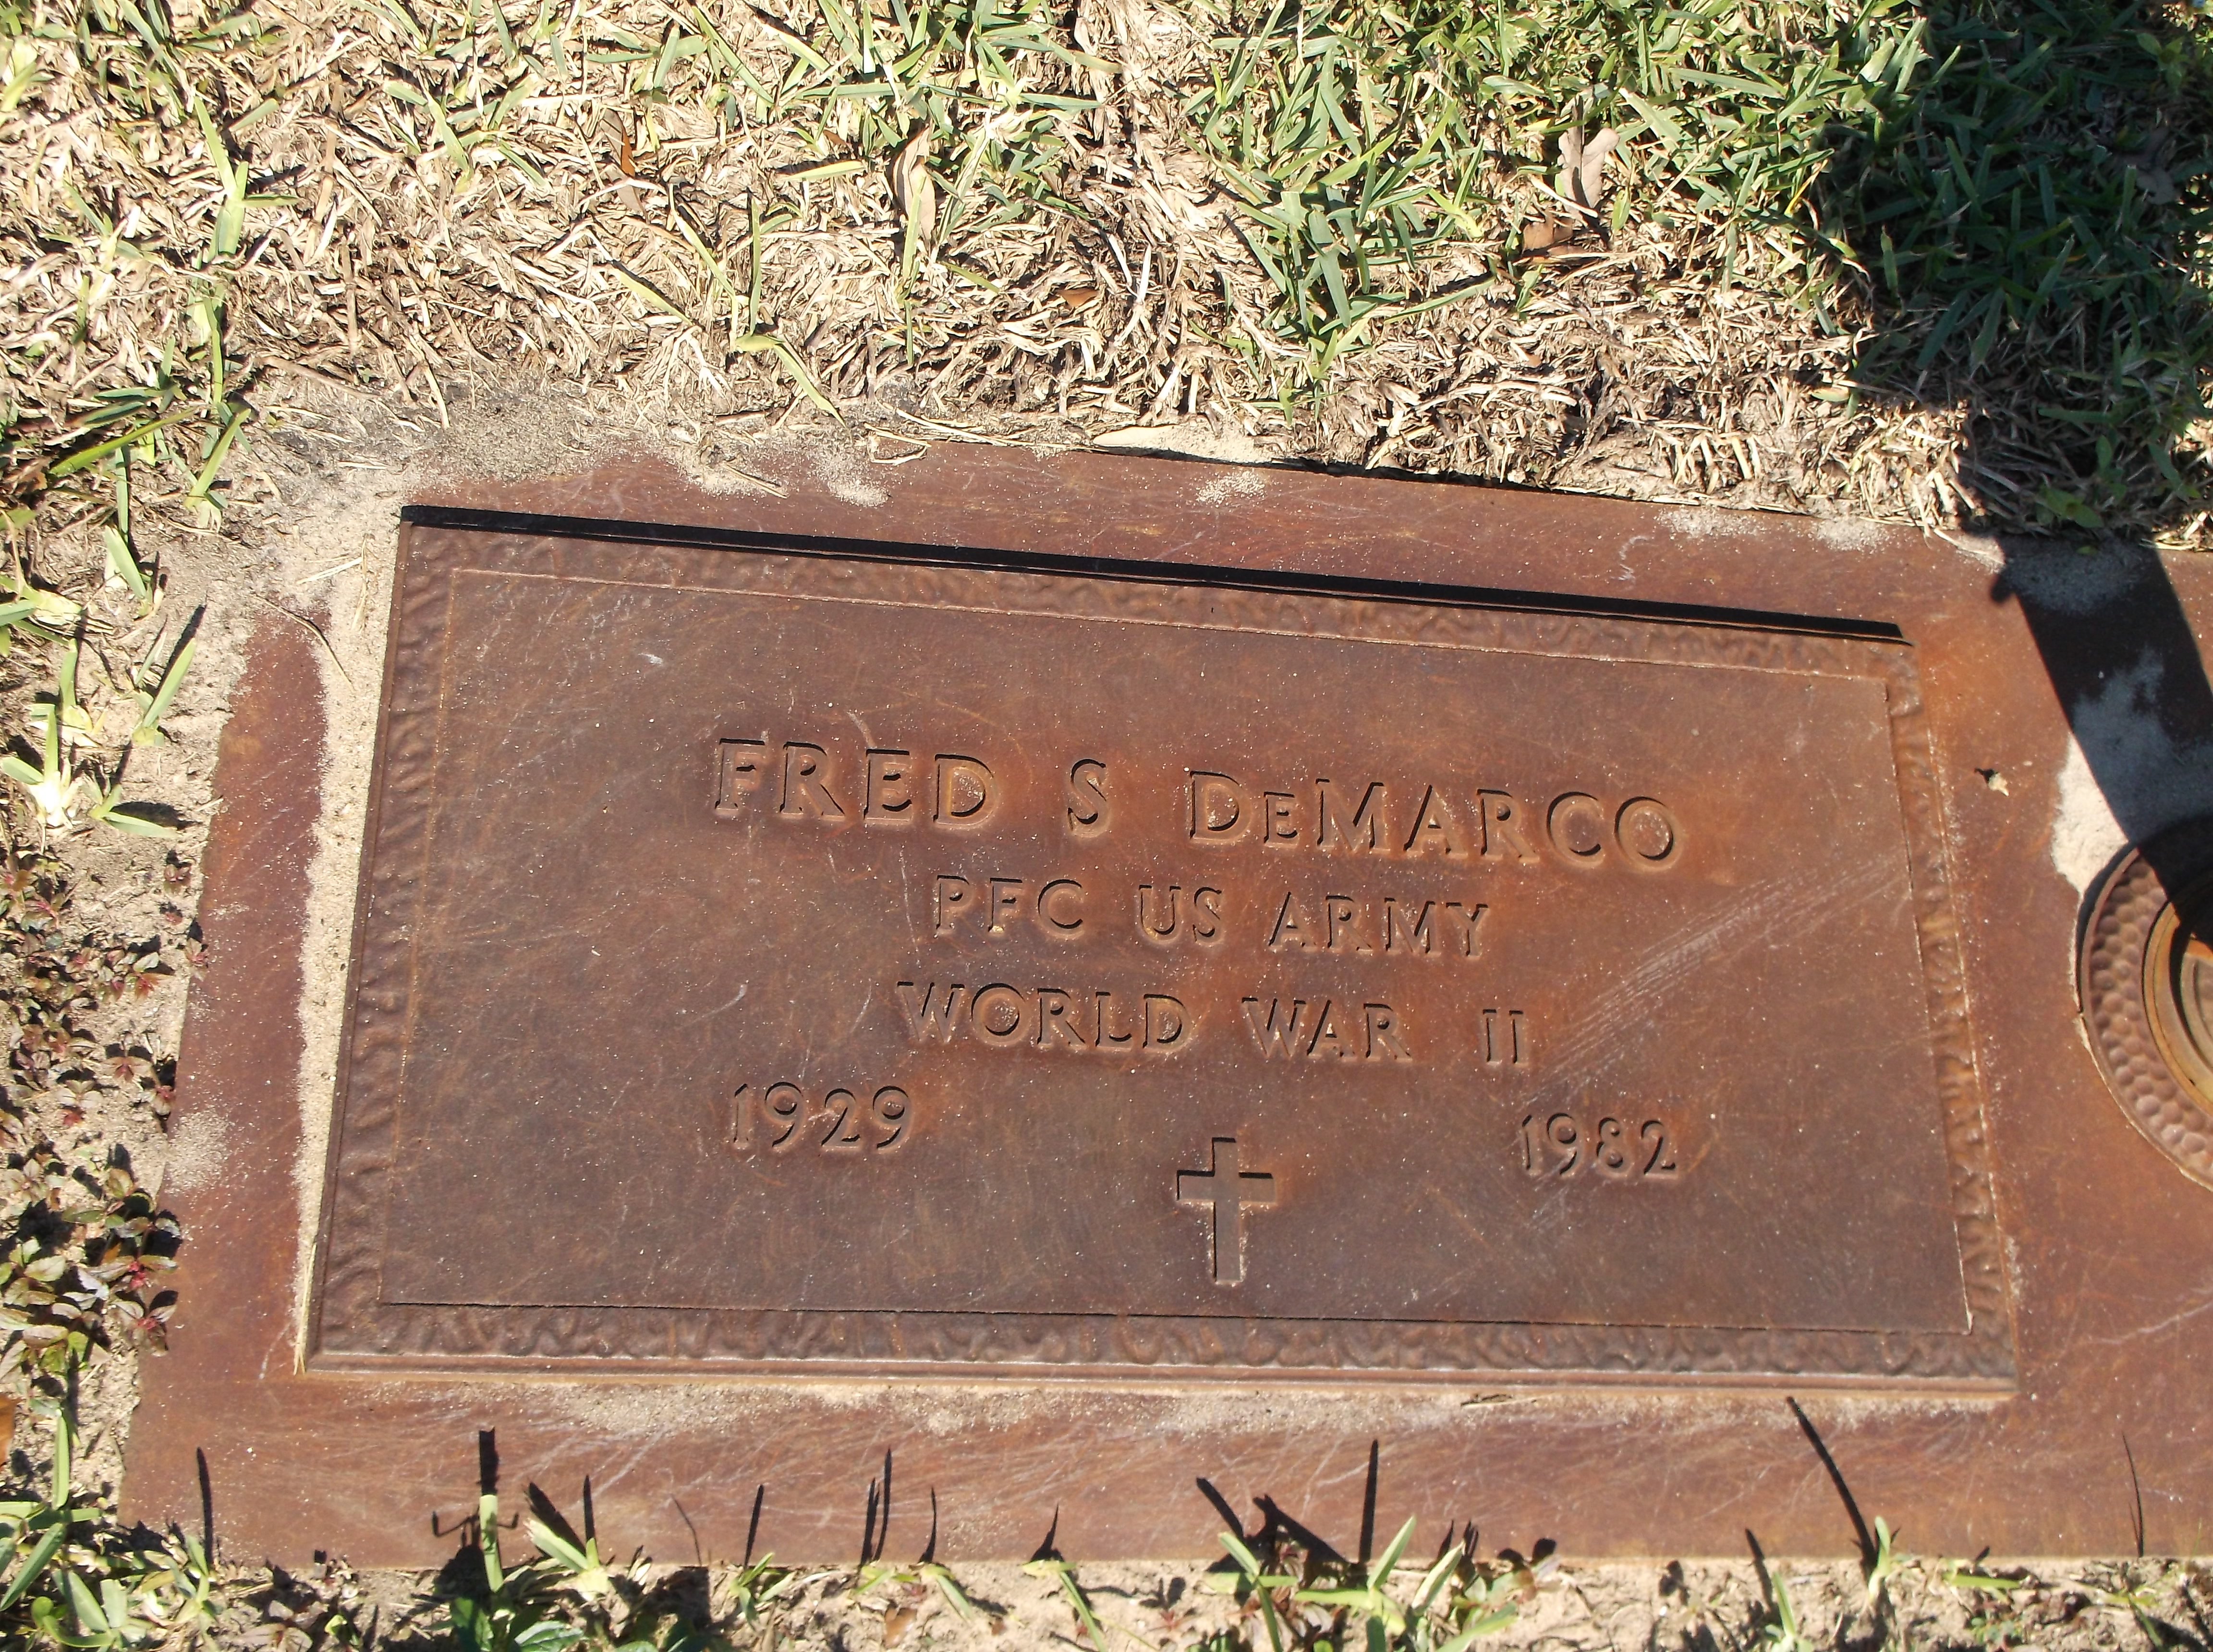 Fred S DeMarco